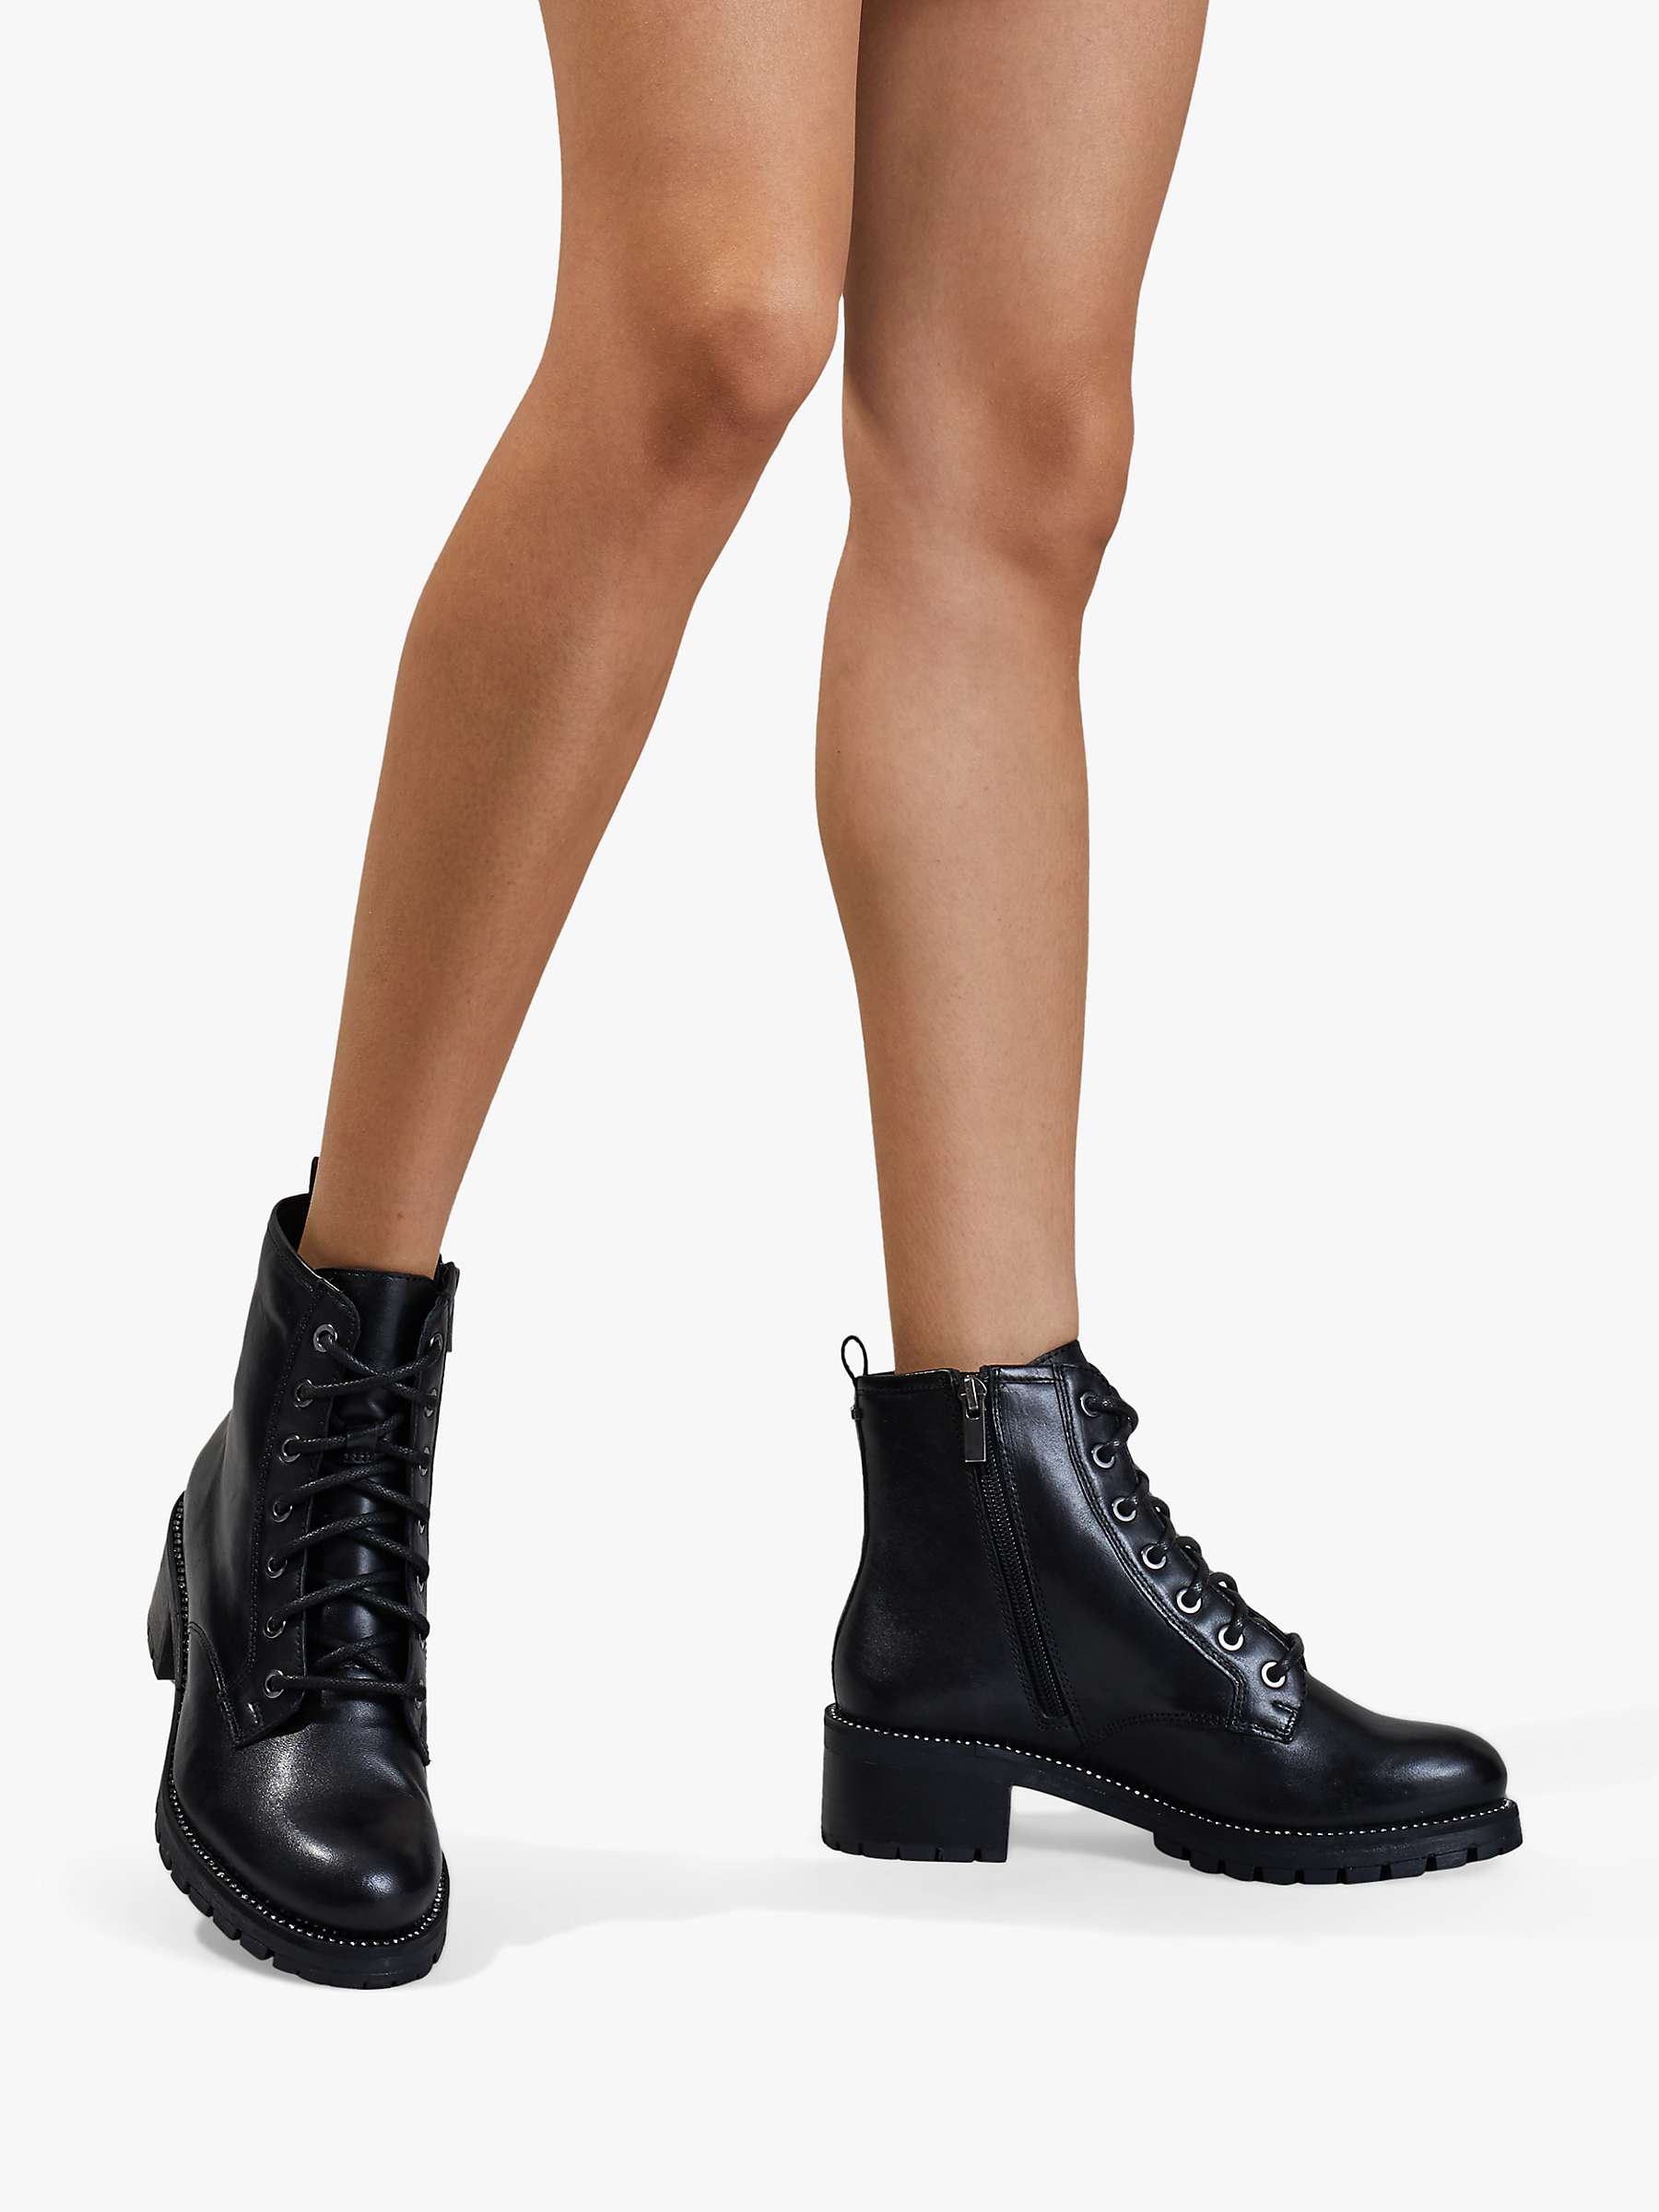 Carvela Treaty Lace Up Ankle Boots, Black at John Lewis & Partners